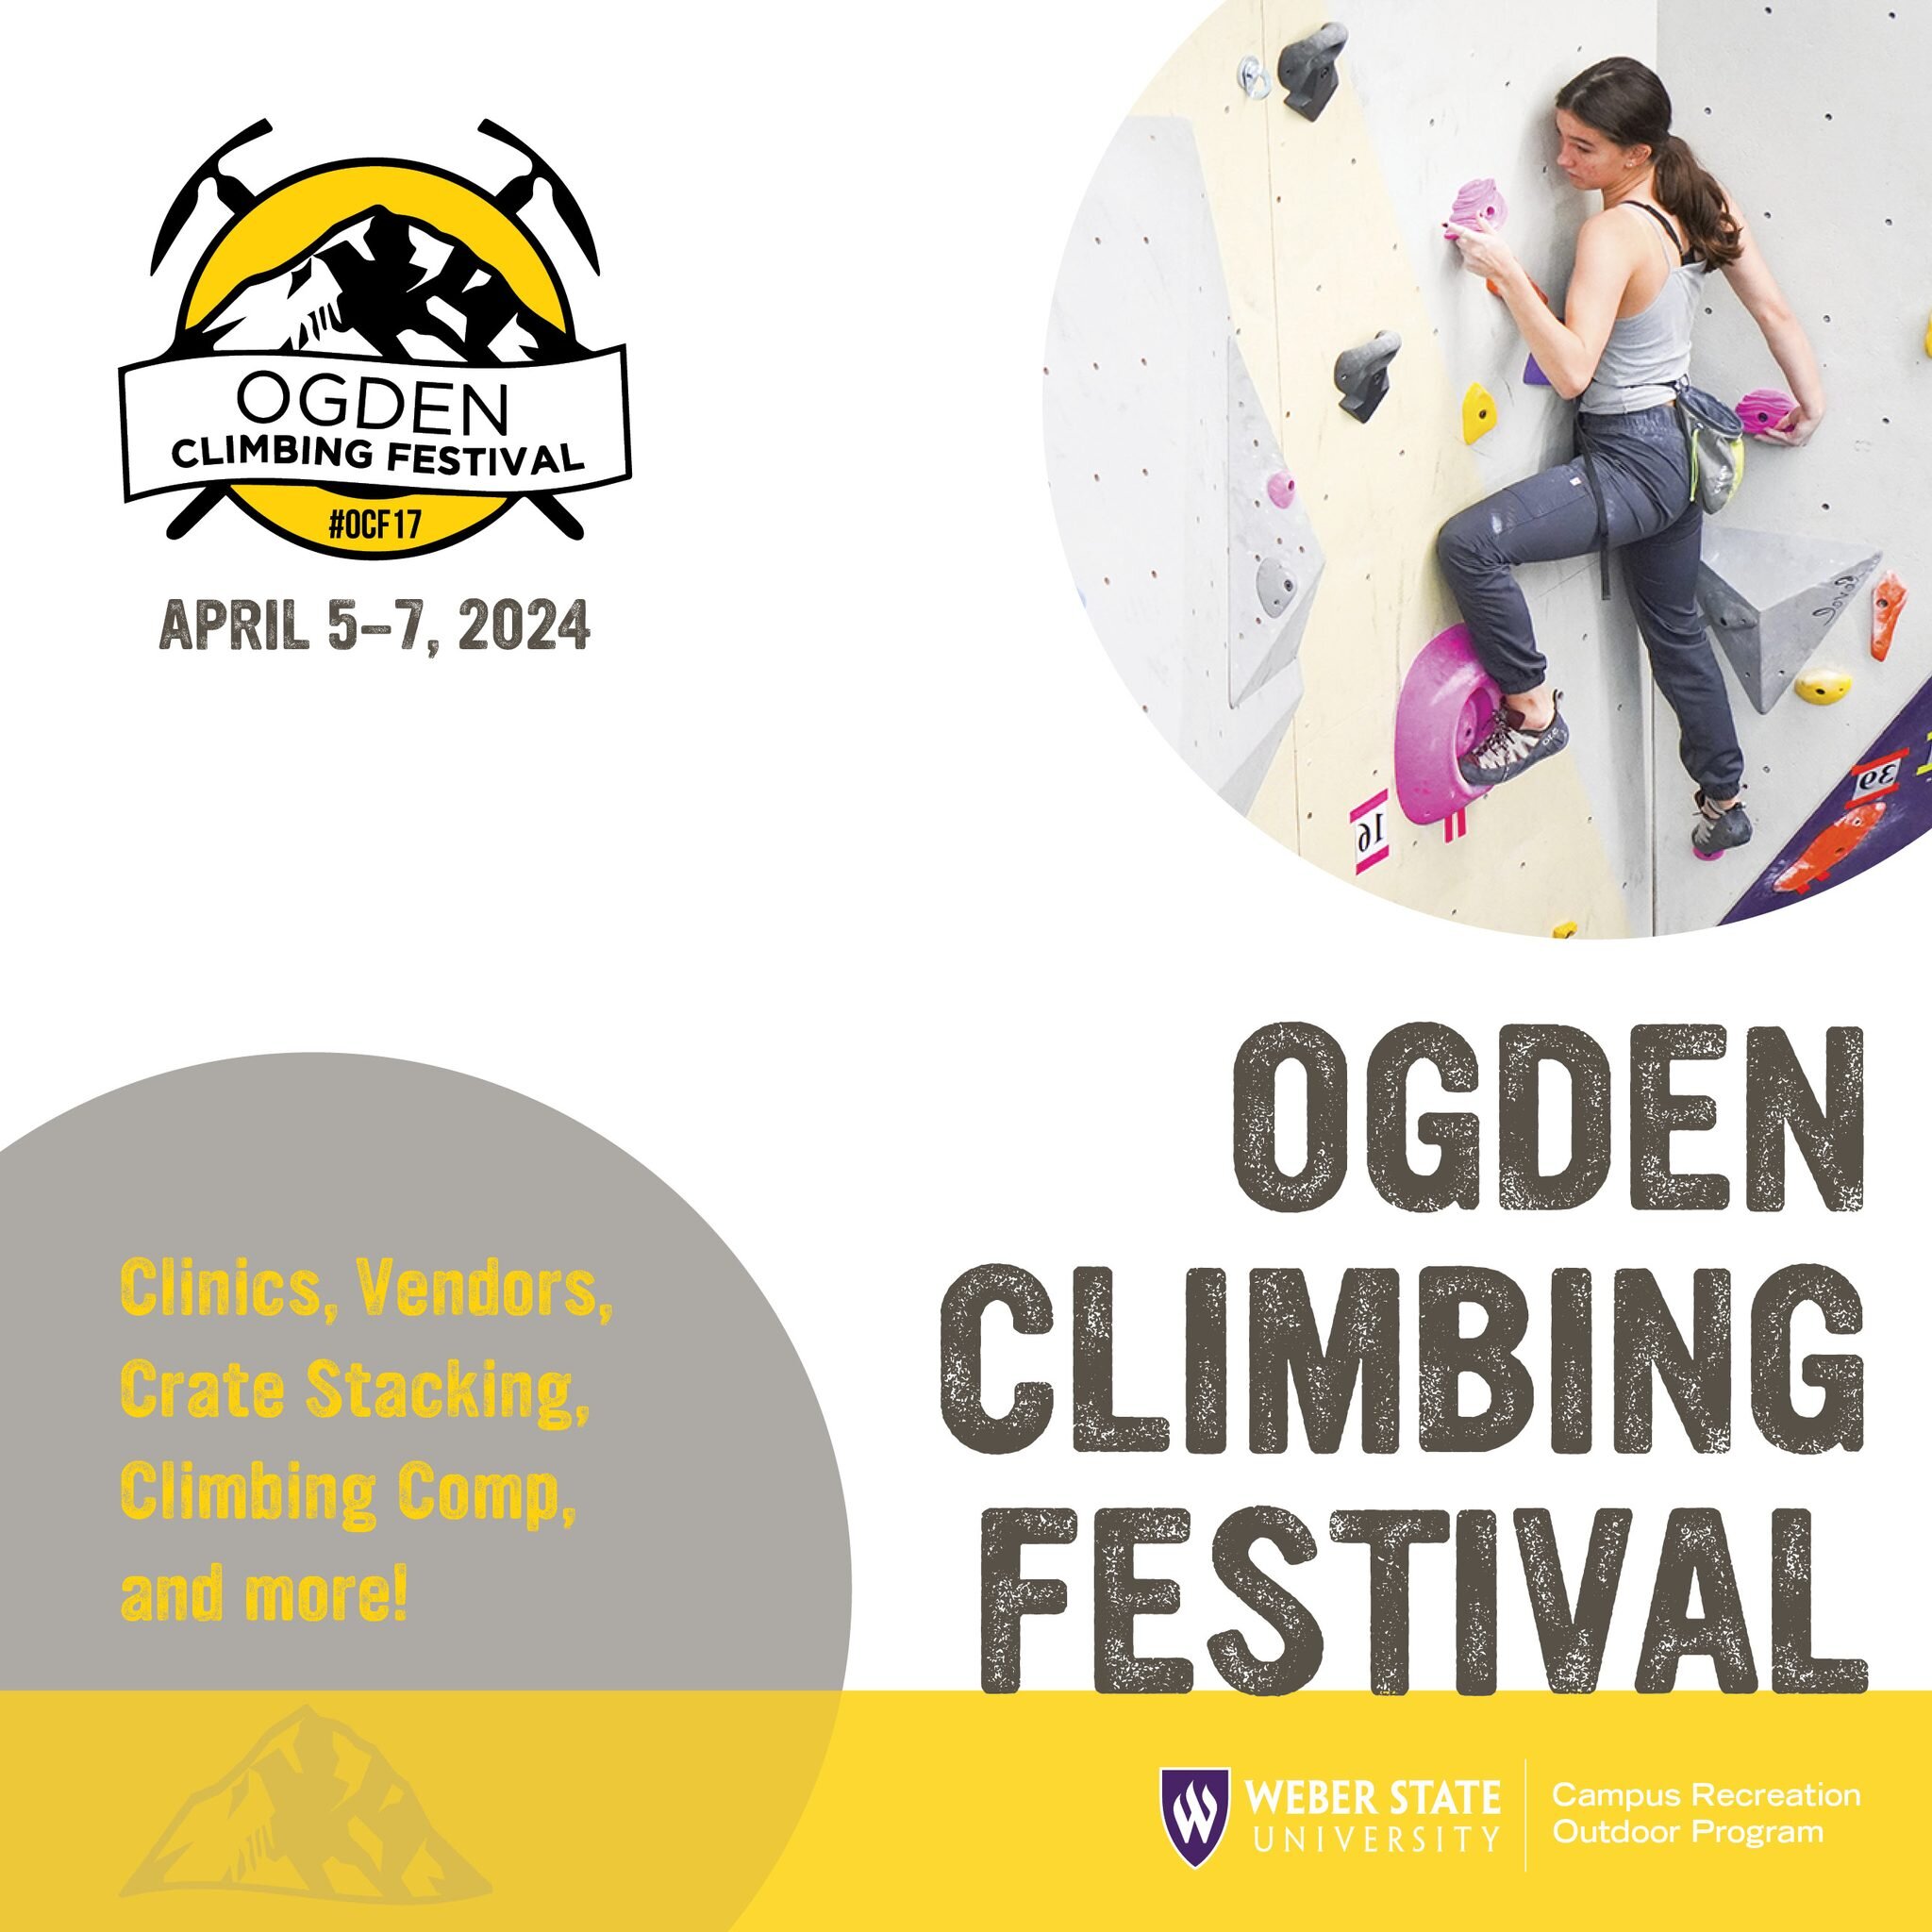 SLAQC is heading back to the OCF!

We're super excited to once again partner with @wsuoutdoorprogram and @ogdenclimbingfestival to bring LGBTQ+ learning spaces to build technical skill in our queer climbing community! We've heard interest from our co